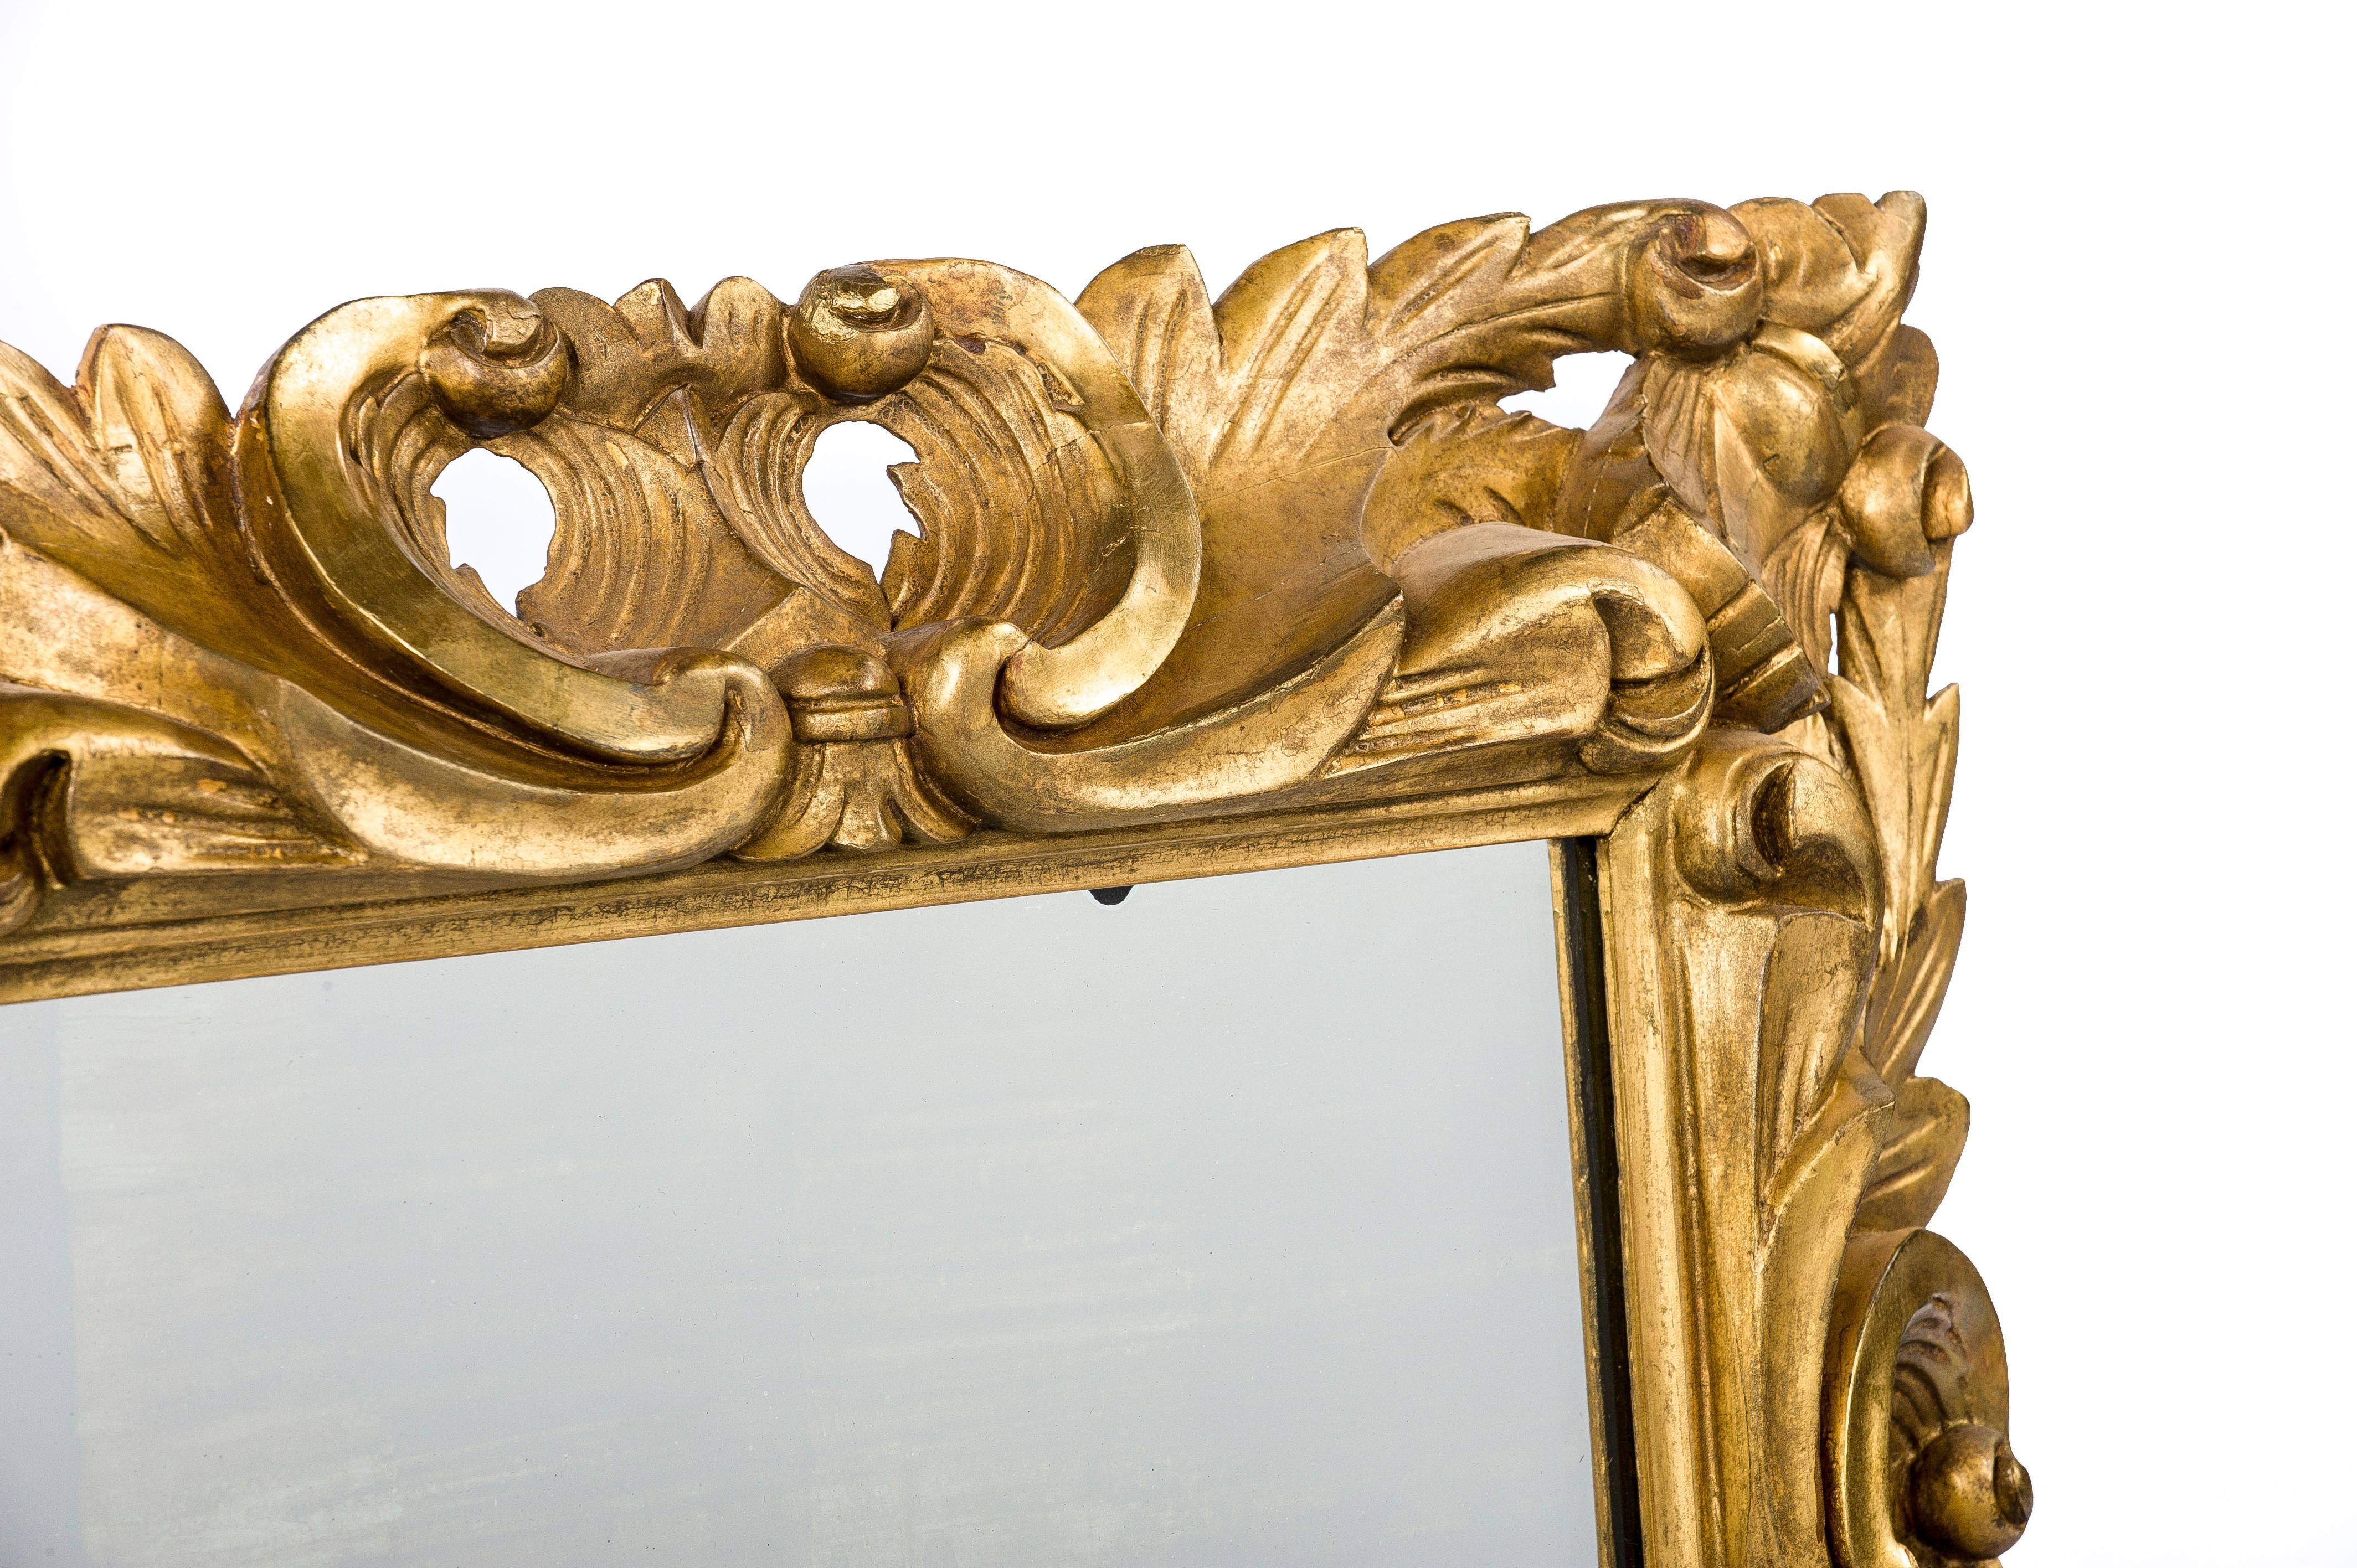 This beautiful pair of Italian Baroque mirrors were made in the first half of the 19th century.
The square frames are hand carved in lime wood and smoothened with gesso. The frame was adorned with typical Baroque design elements such as C-scrolls